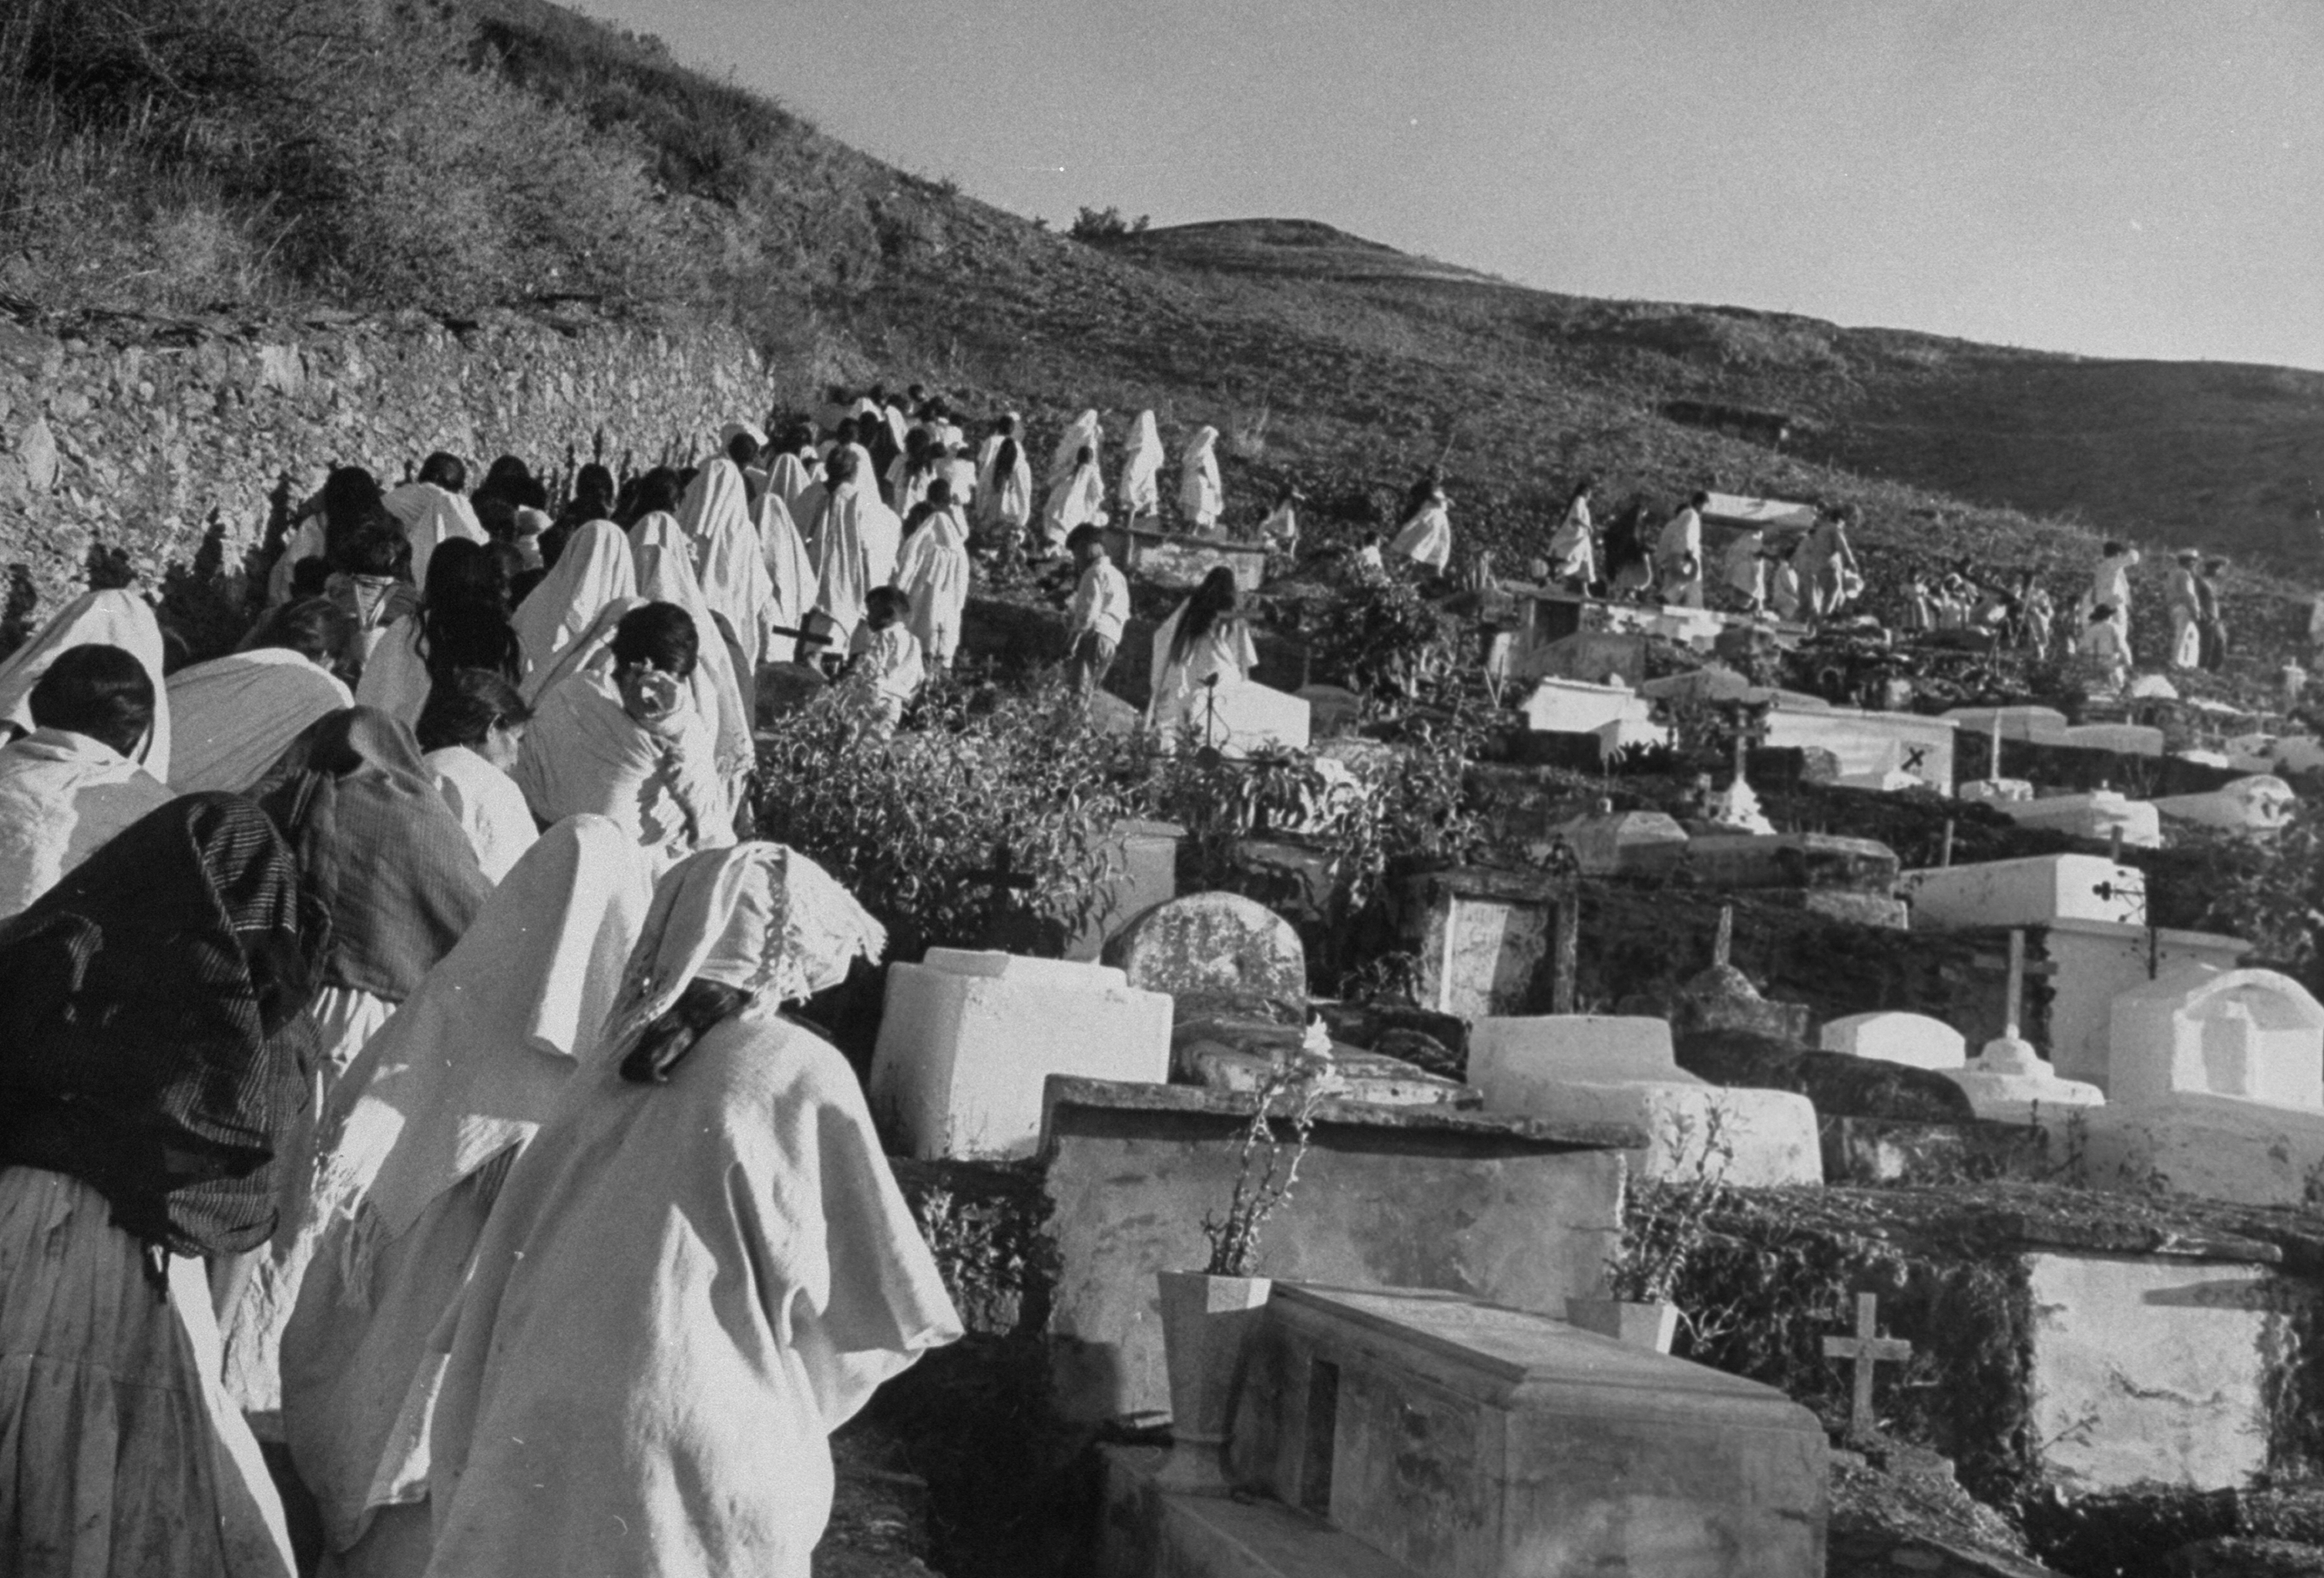 Village procession en route to cemetery, women wearing shawls on heads (Wallace Kirkland&mdash;The LIFE Picture Collection/Getty Images)